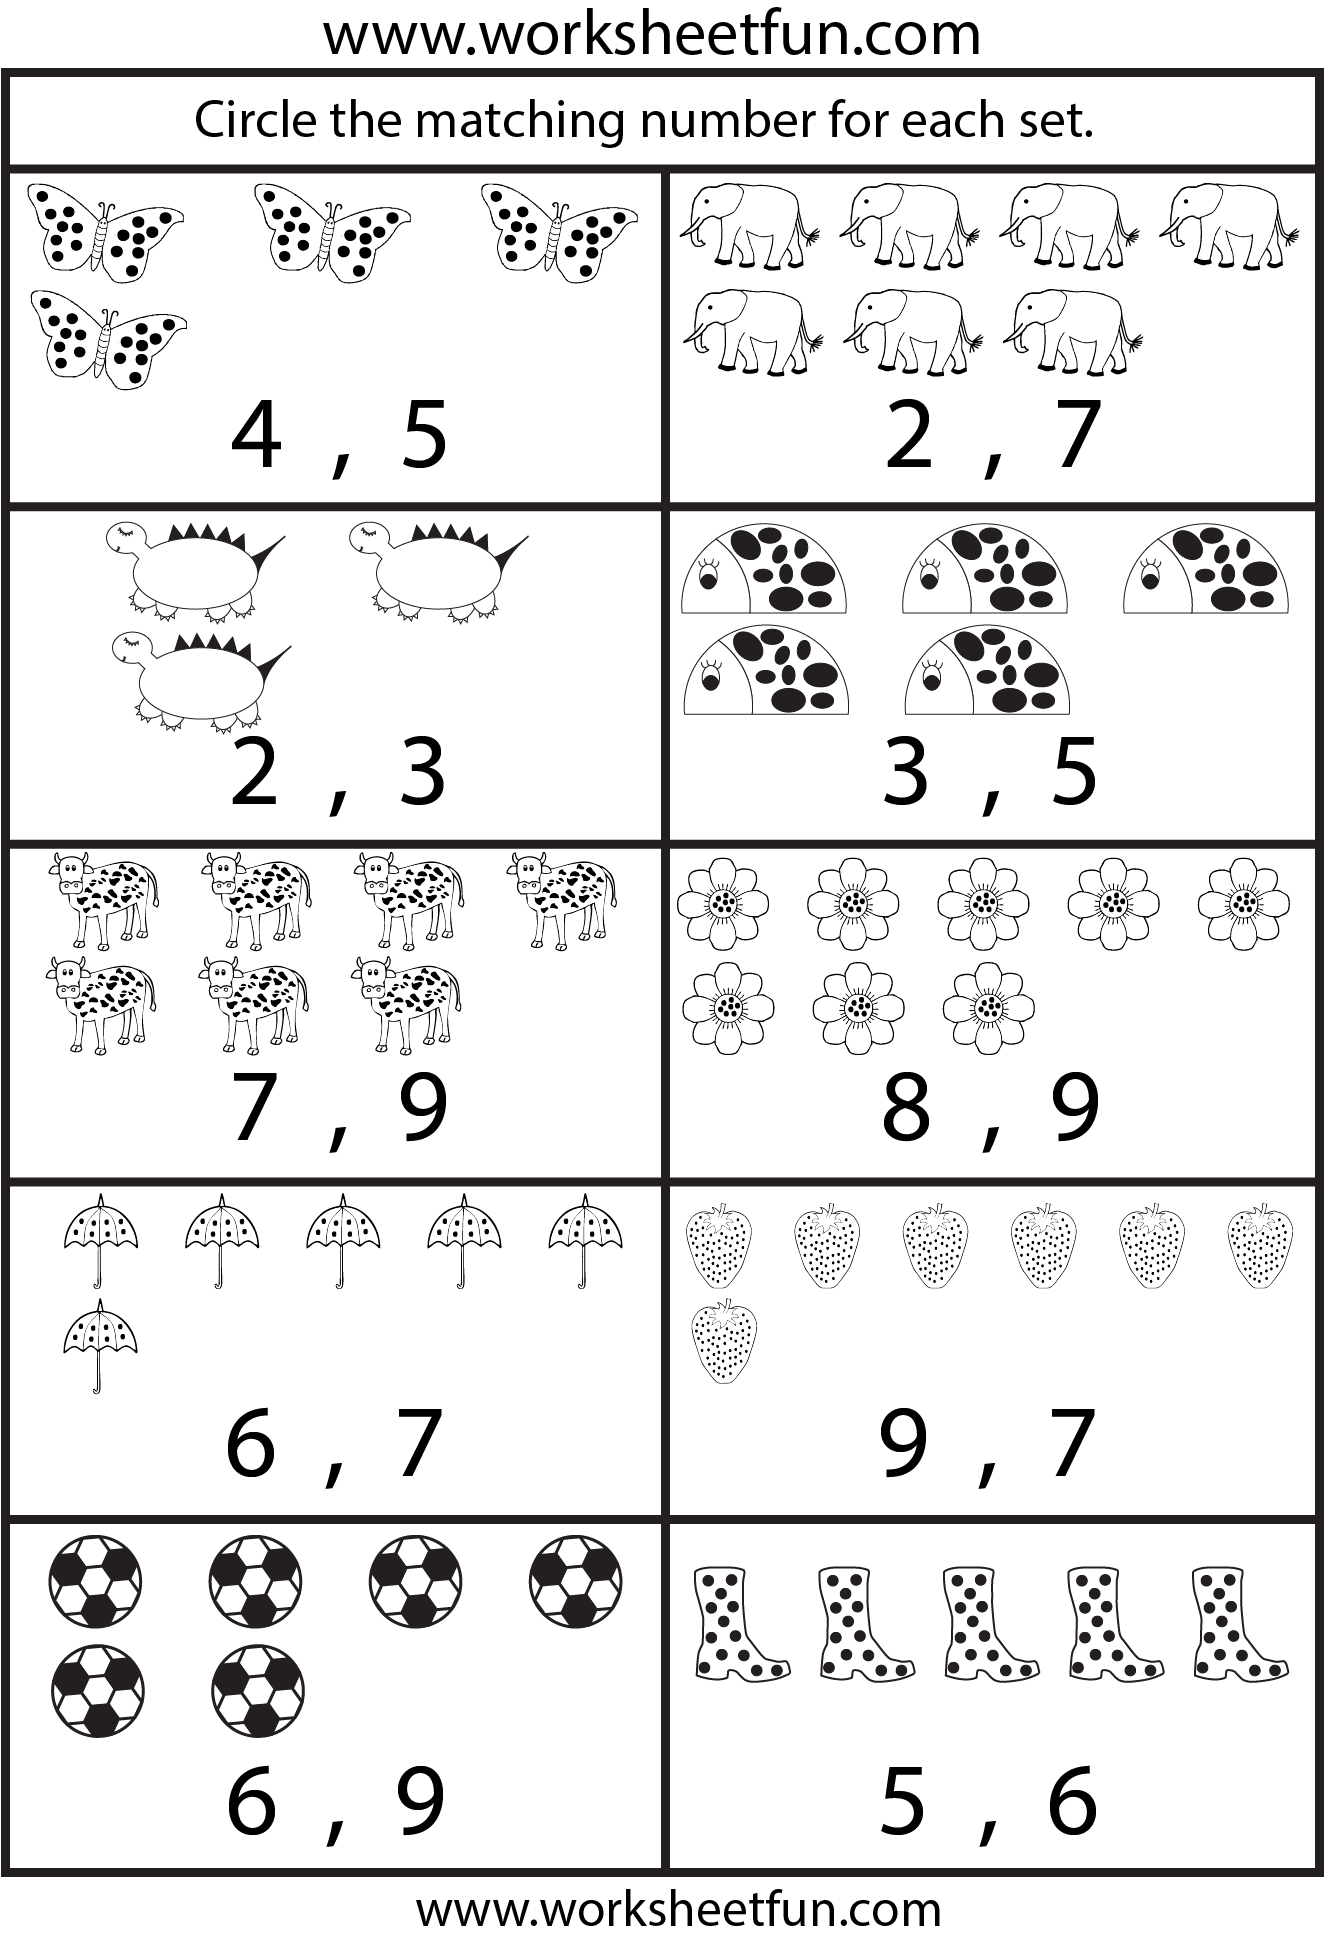 new-916-counting-numbers-worksheets-1-50-counting-worksheet